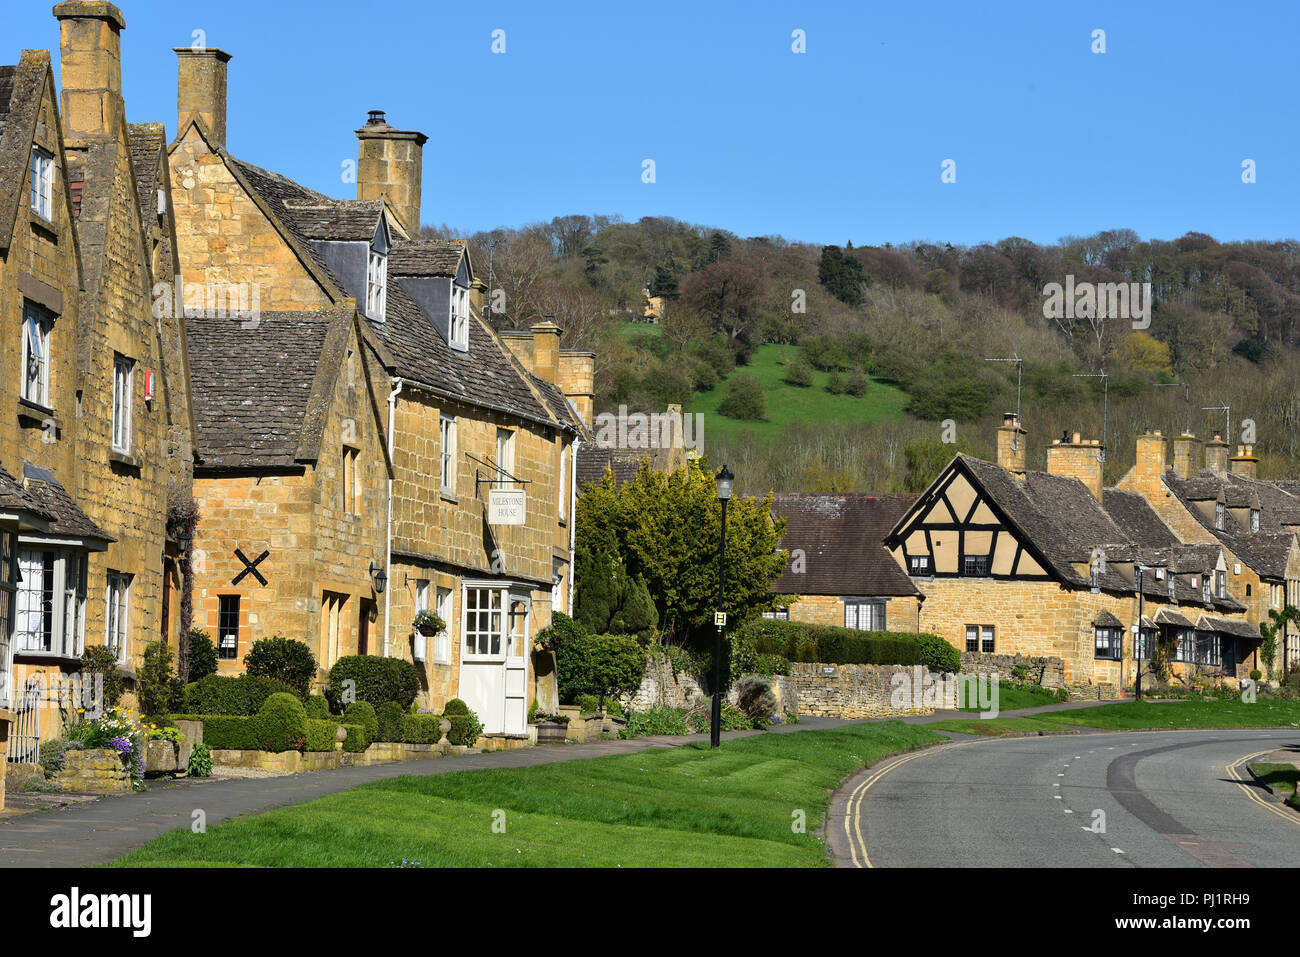 The quaint, picture-postcard village of Broadway at the heart of the Cotswold Hills, Worcestershire, England. Stock Photo